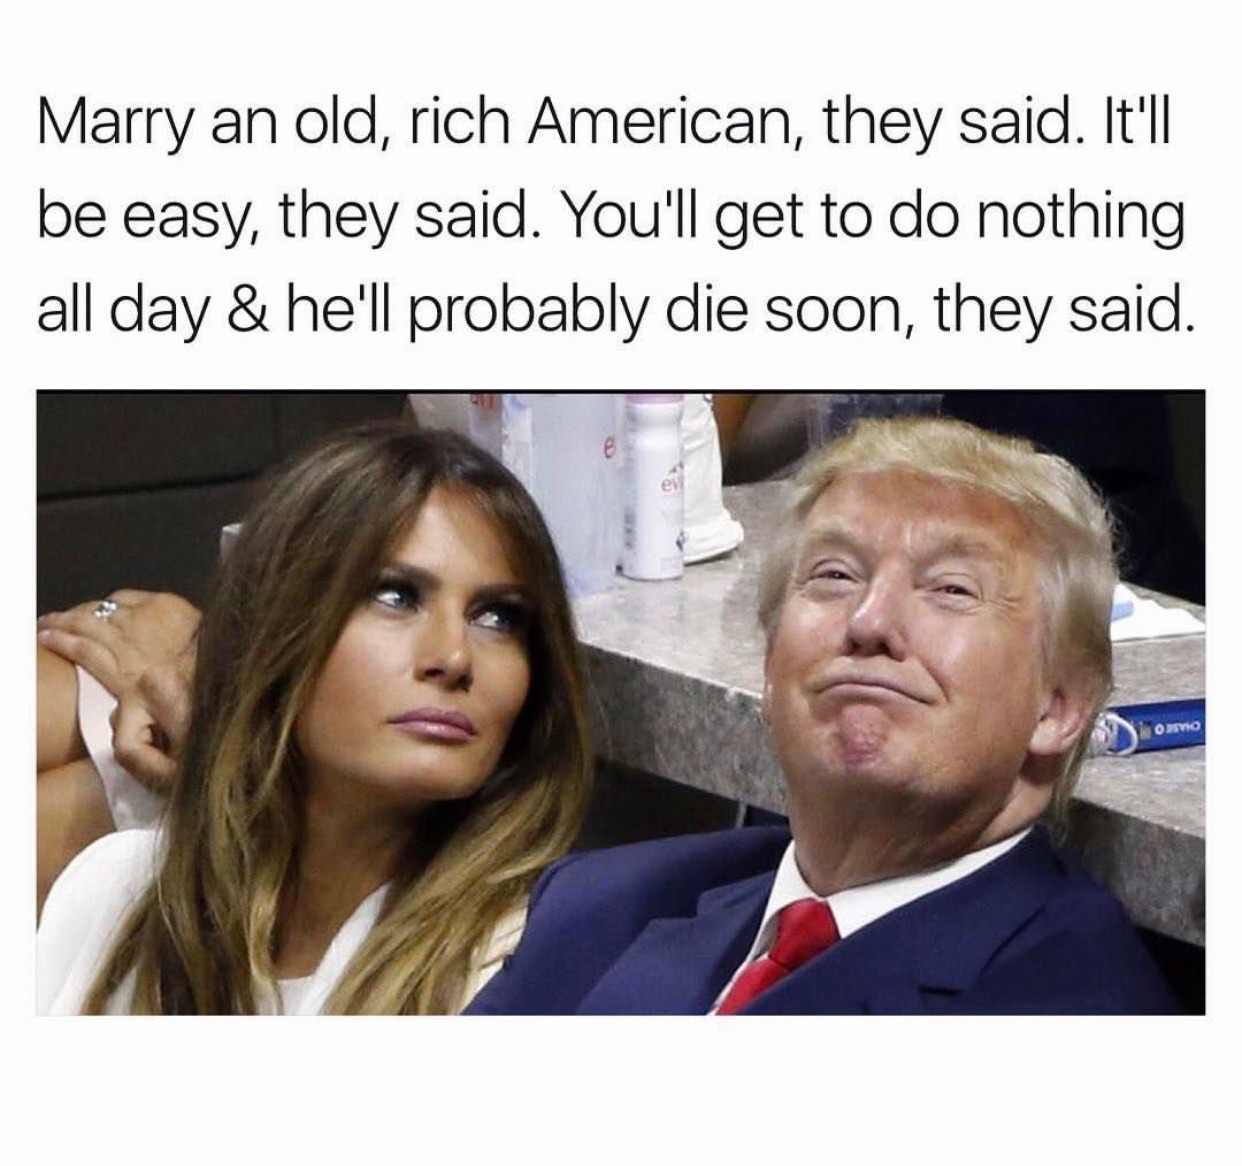 funny trump memes - Marry an old, rich American, they said. It'll be easy, they said. You'll get to do nothing all day & he'll probably die soon, they said.